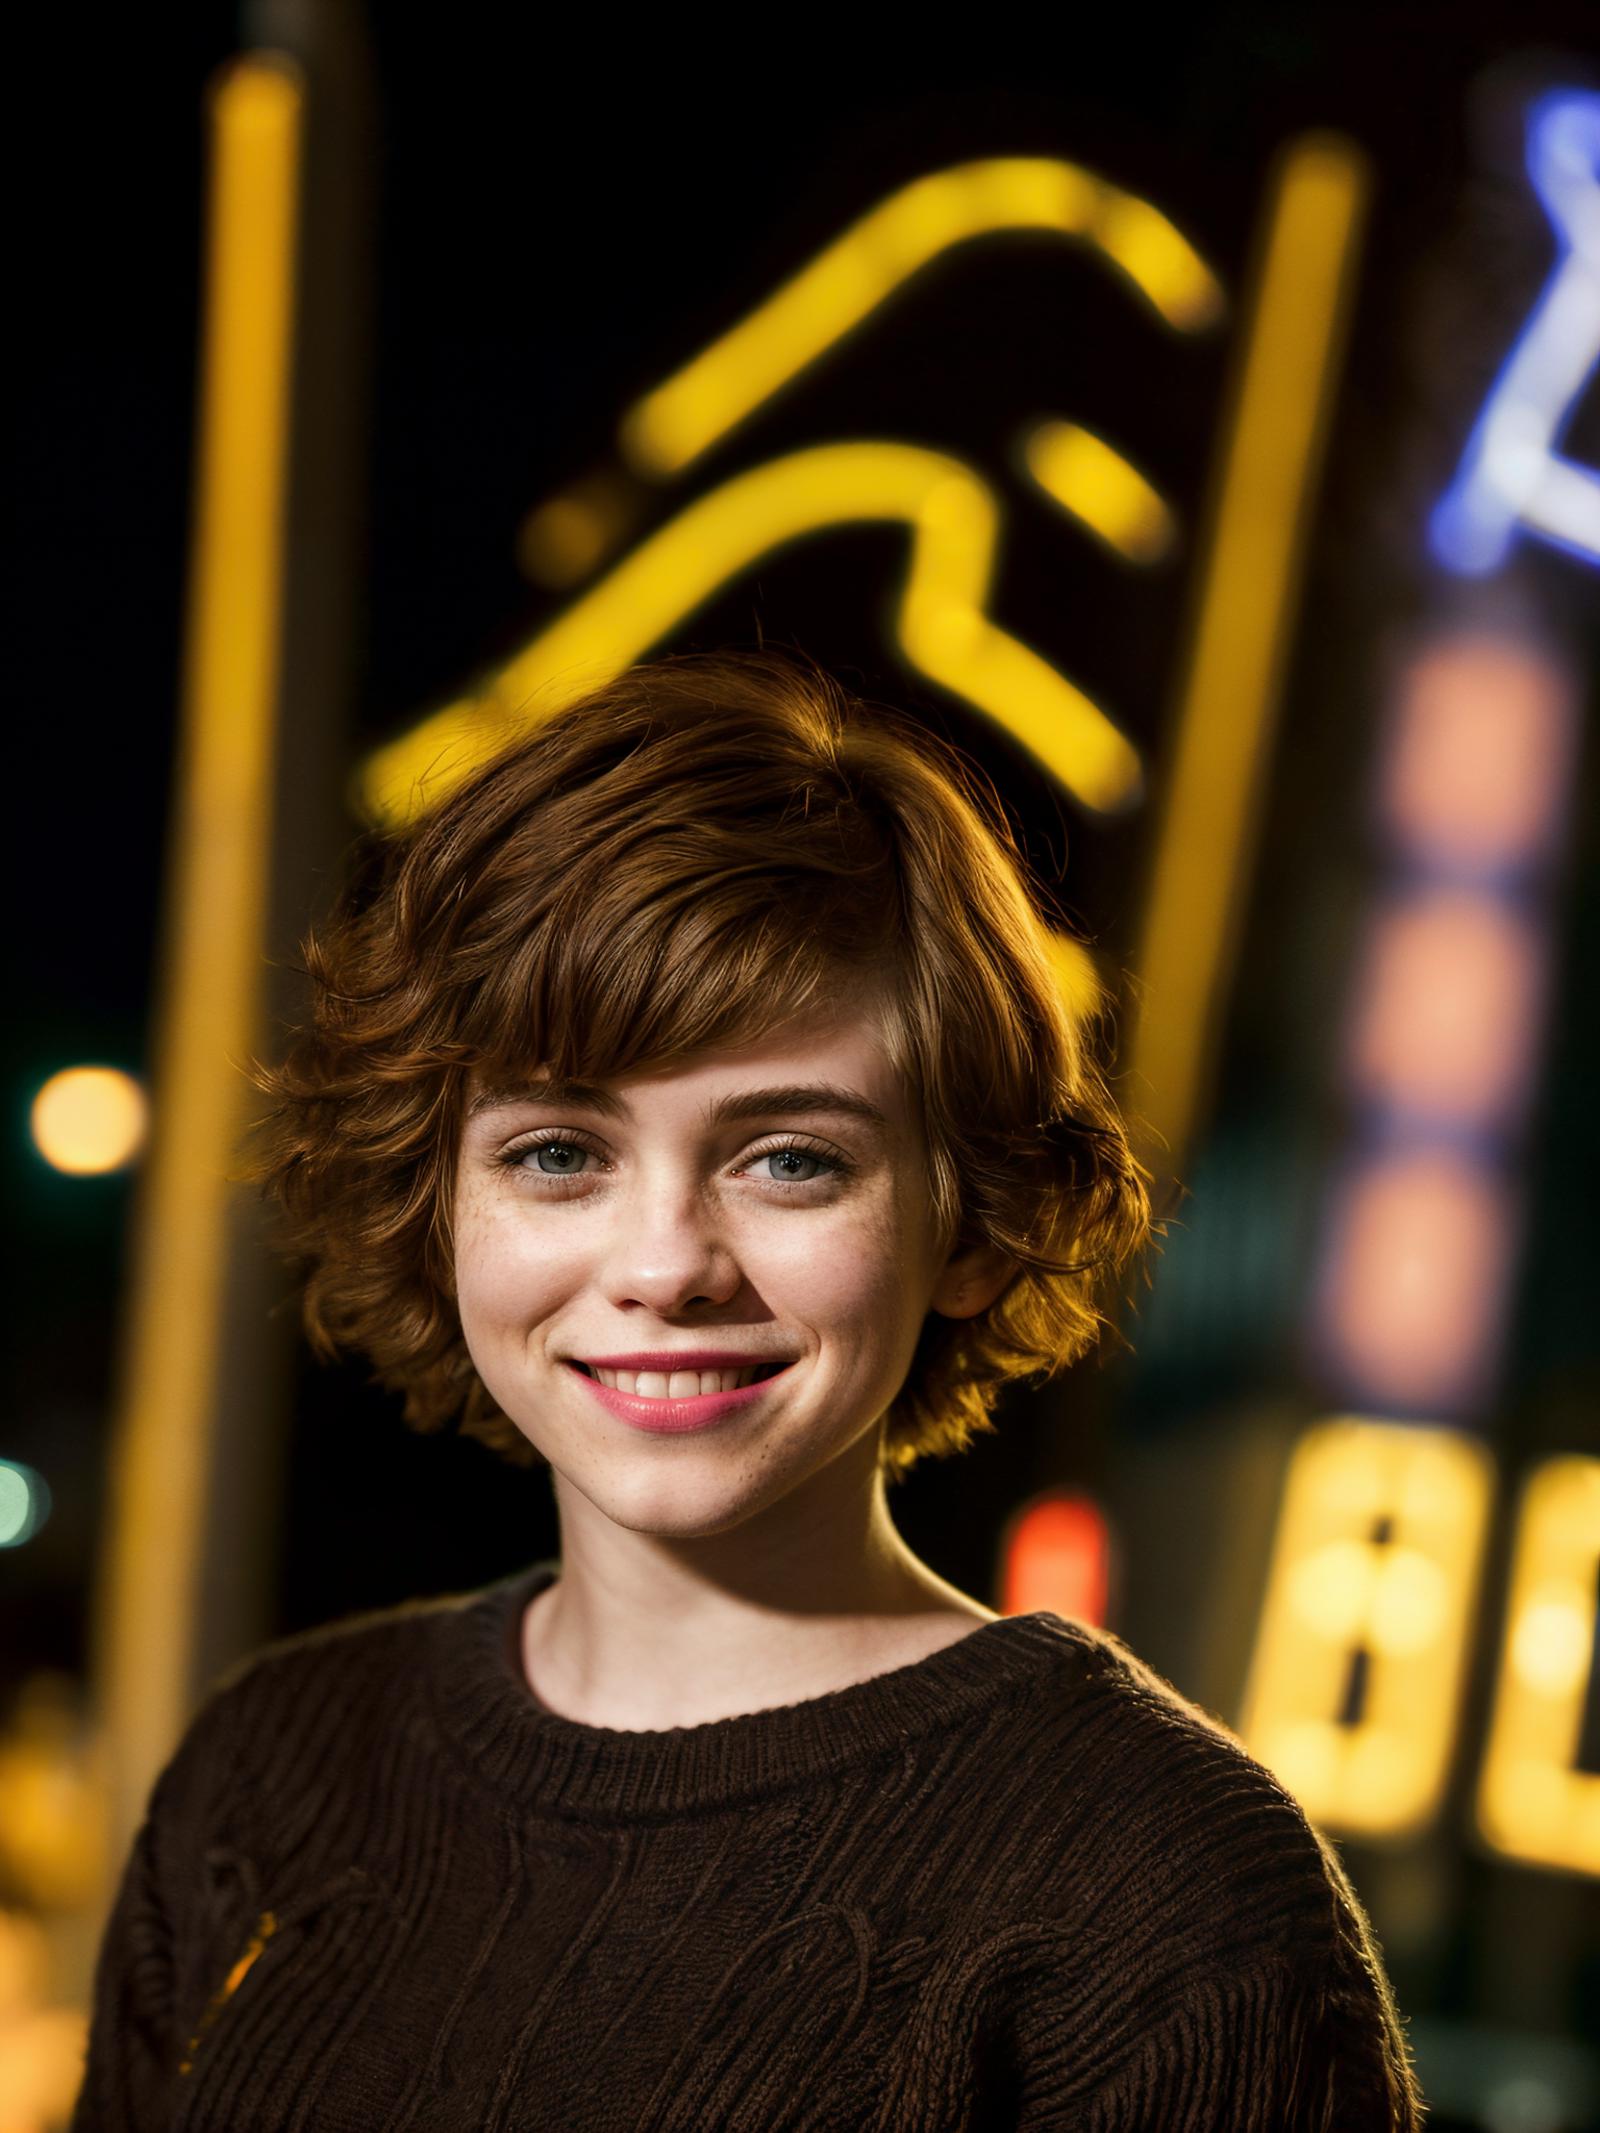 Sophia Lillis / Doric from Dungeons and Dragons image by damocles_aaa